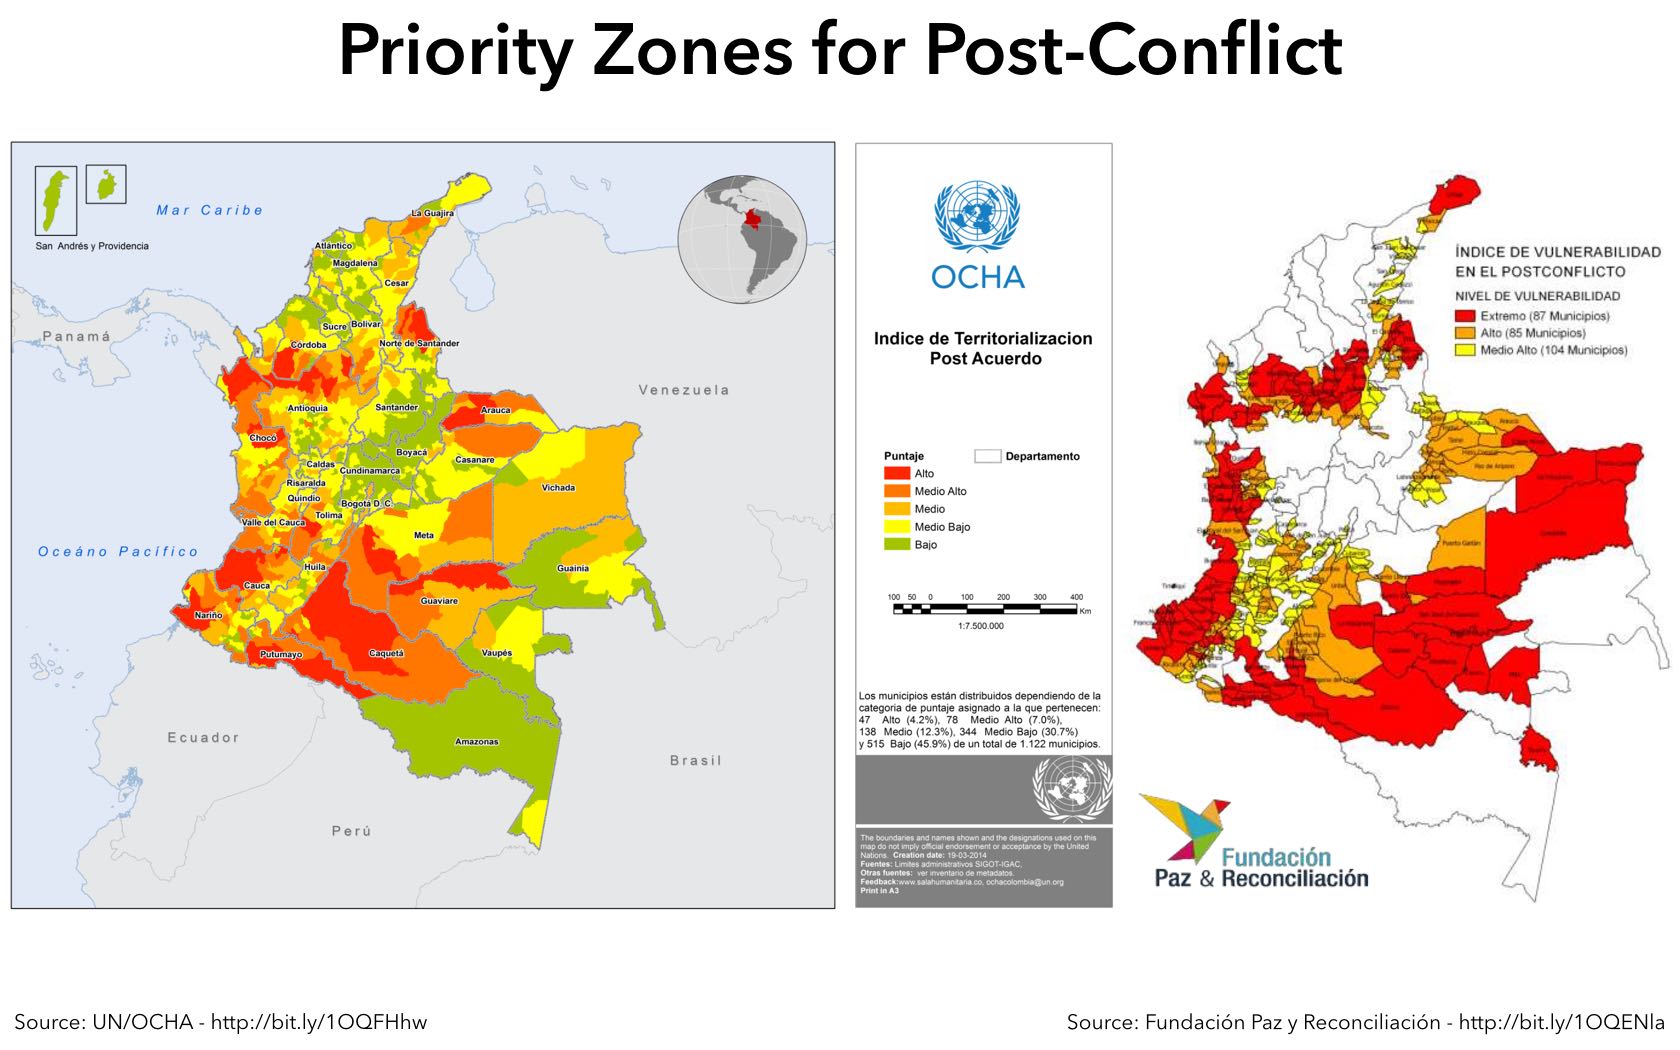 Maps from UN-OCHA and the Peace and Reconciliation Foundation depicting priority municipalities for governance in a post-conflict scenario